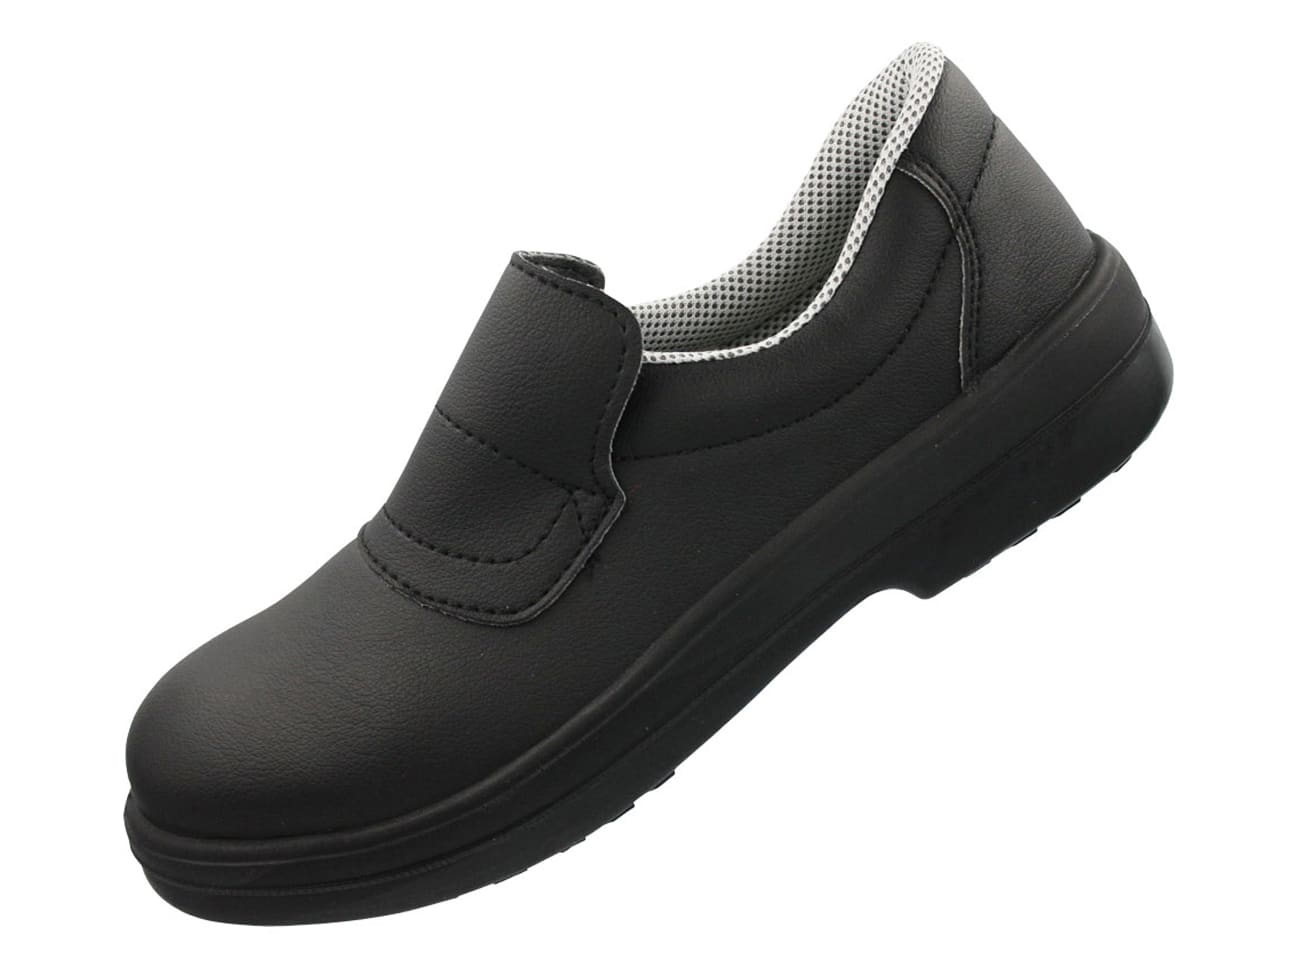 Tony Black Catering Safety Shoes - Size 44 - NORD'WAYS - Meilleur du Chef